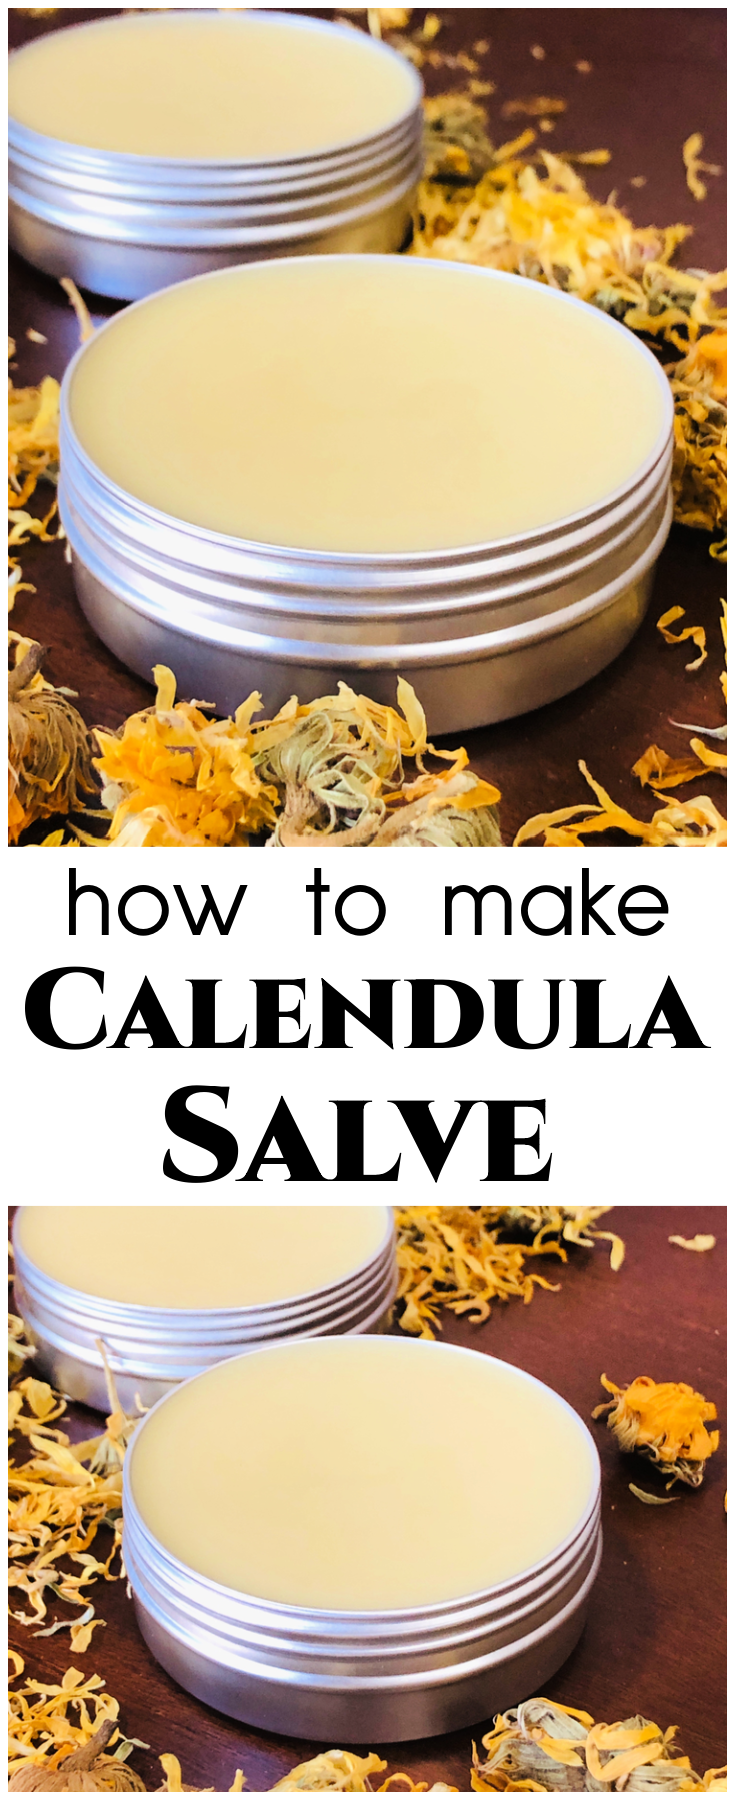 Step by step tutorial that will show you how to make calendula salve – a skin-friendly salve that’s perfect for supporting skin cuts, scrapes, bites and more!